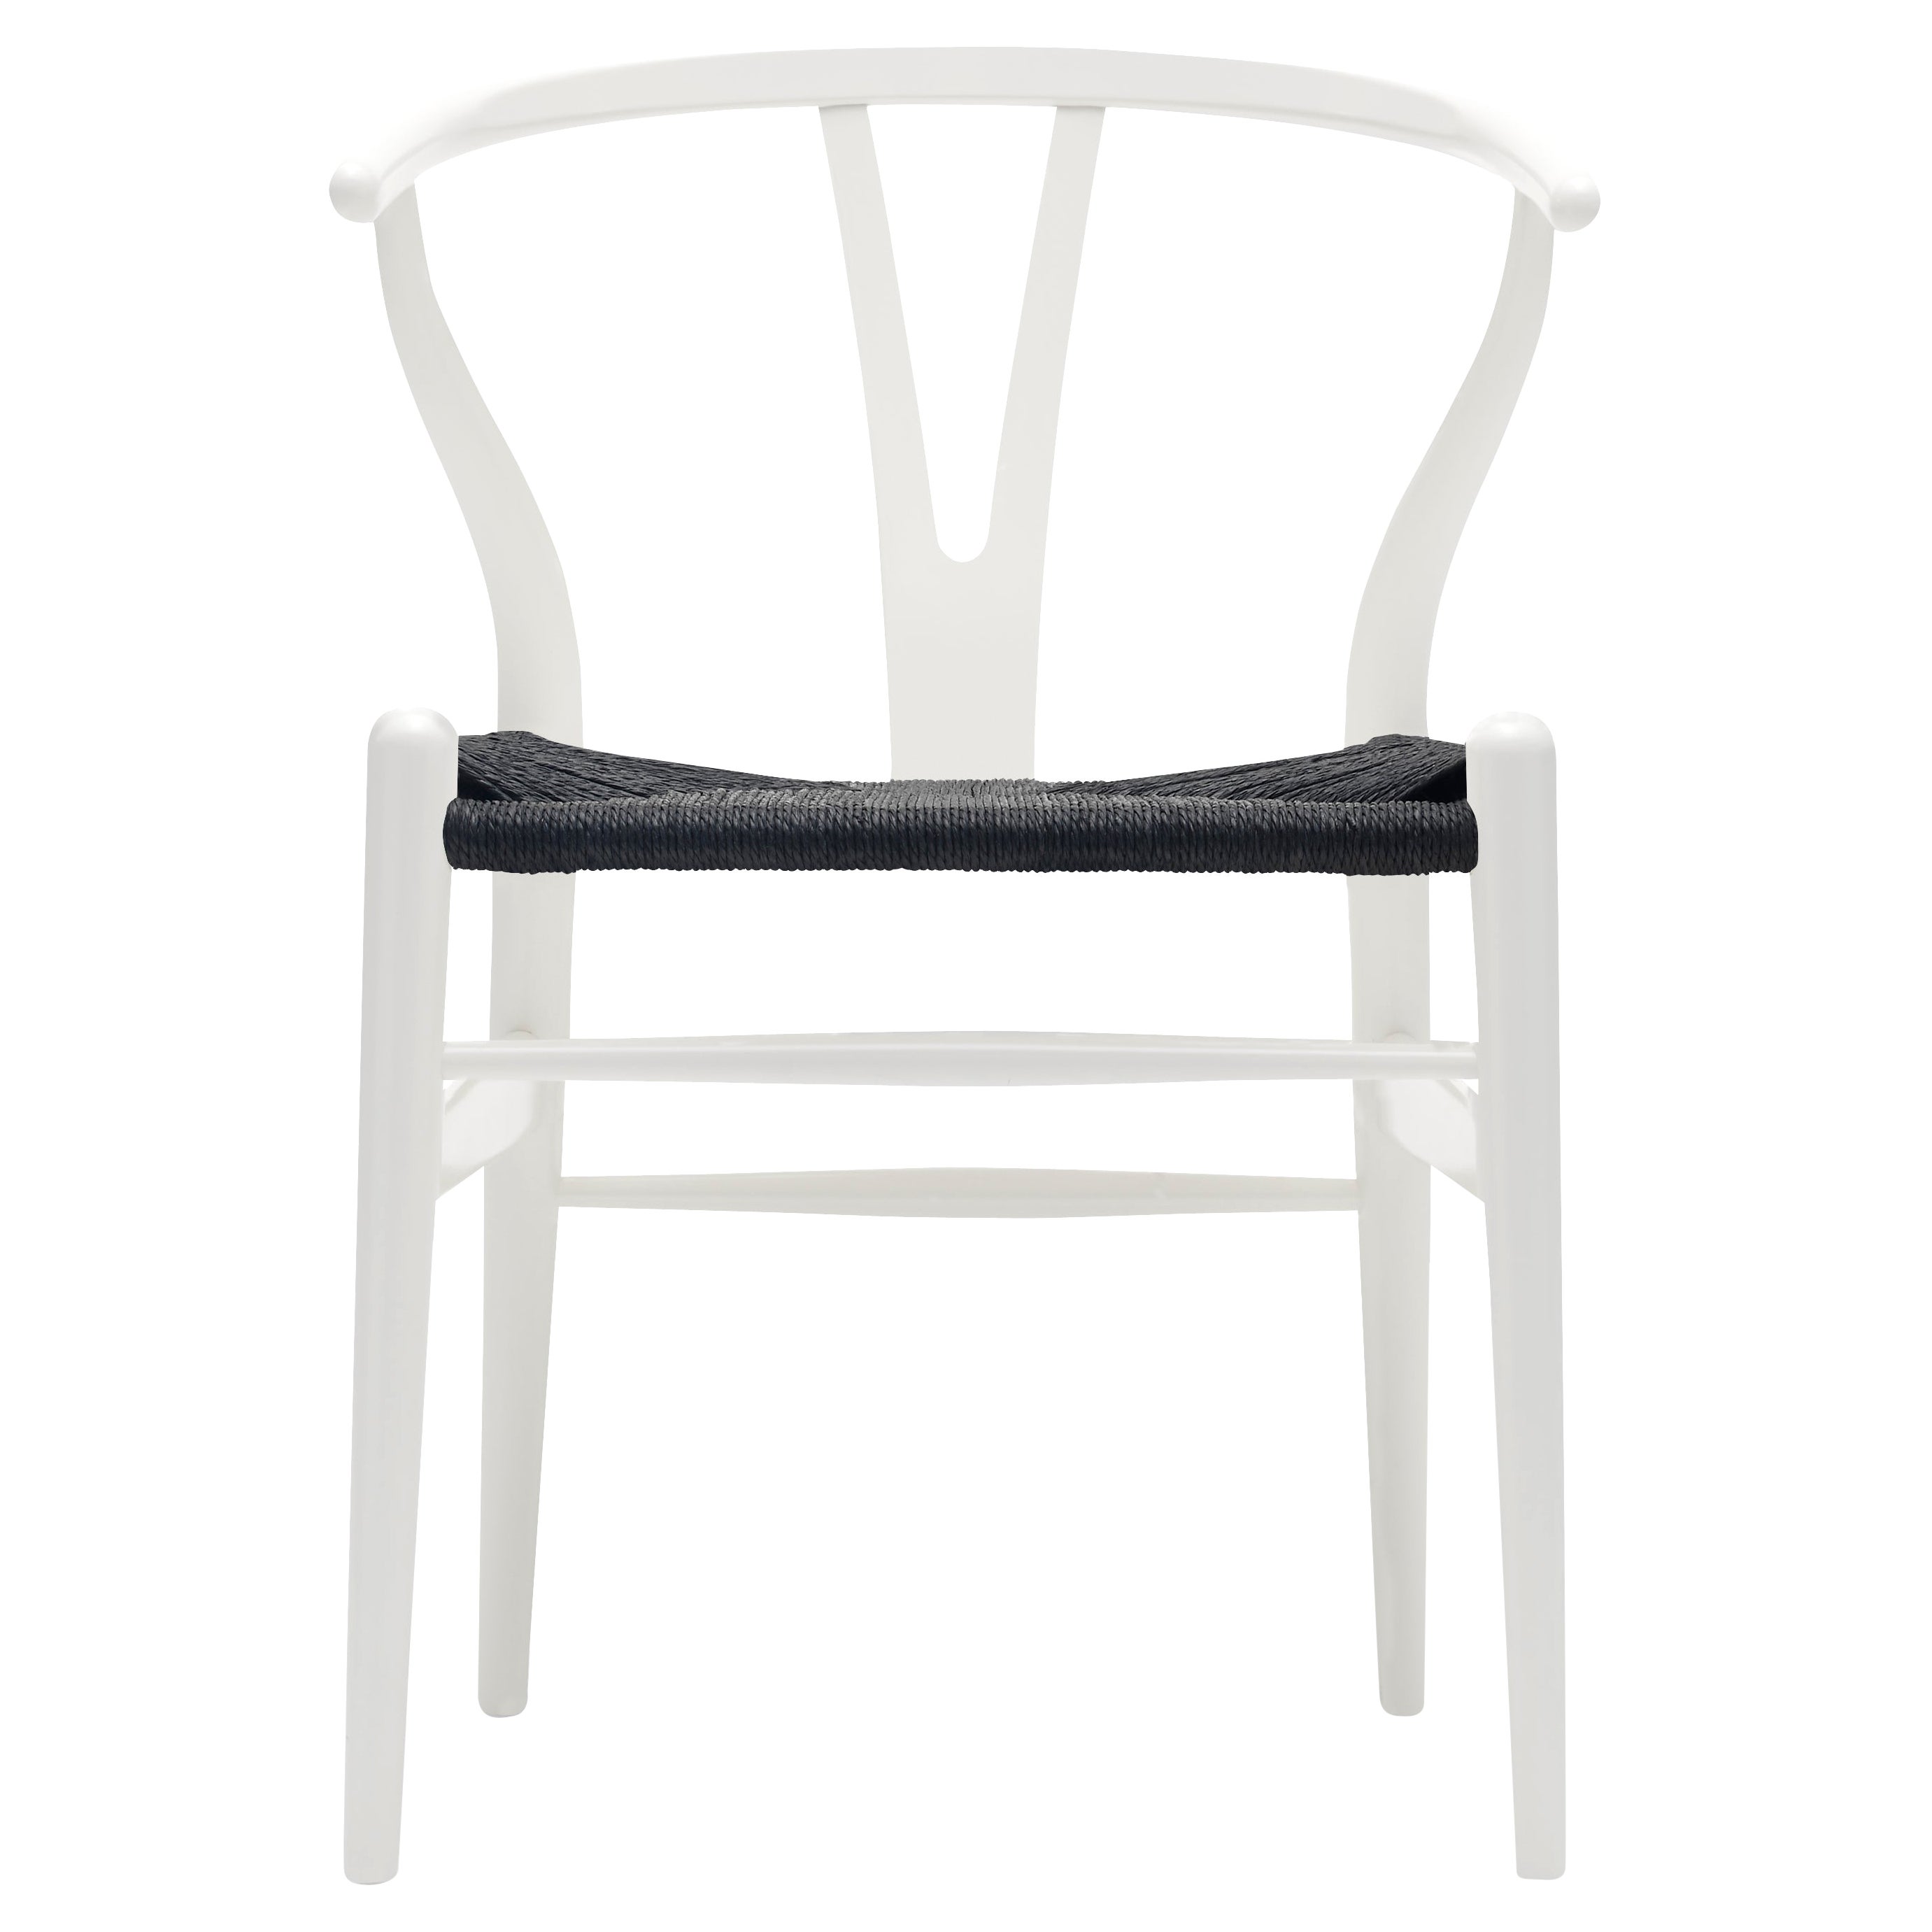 CH24 Wishbone Chair in Natural White with Black Papercord Seat by Hans Wegner